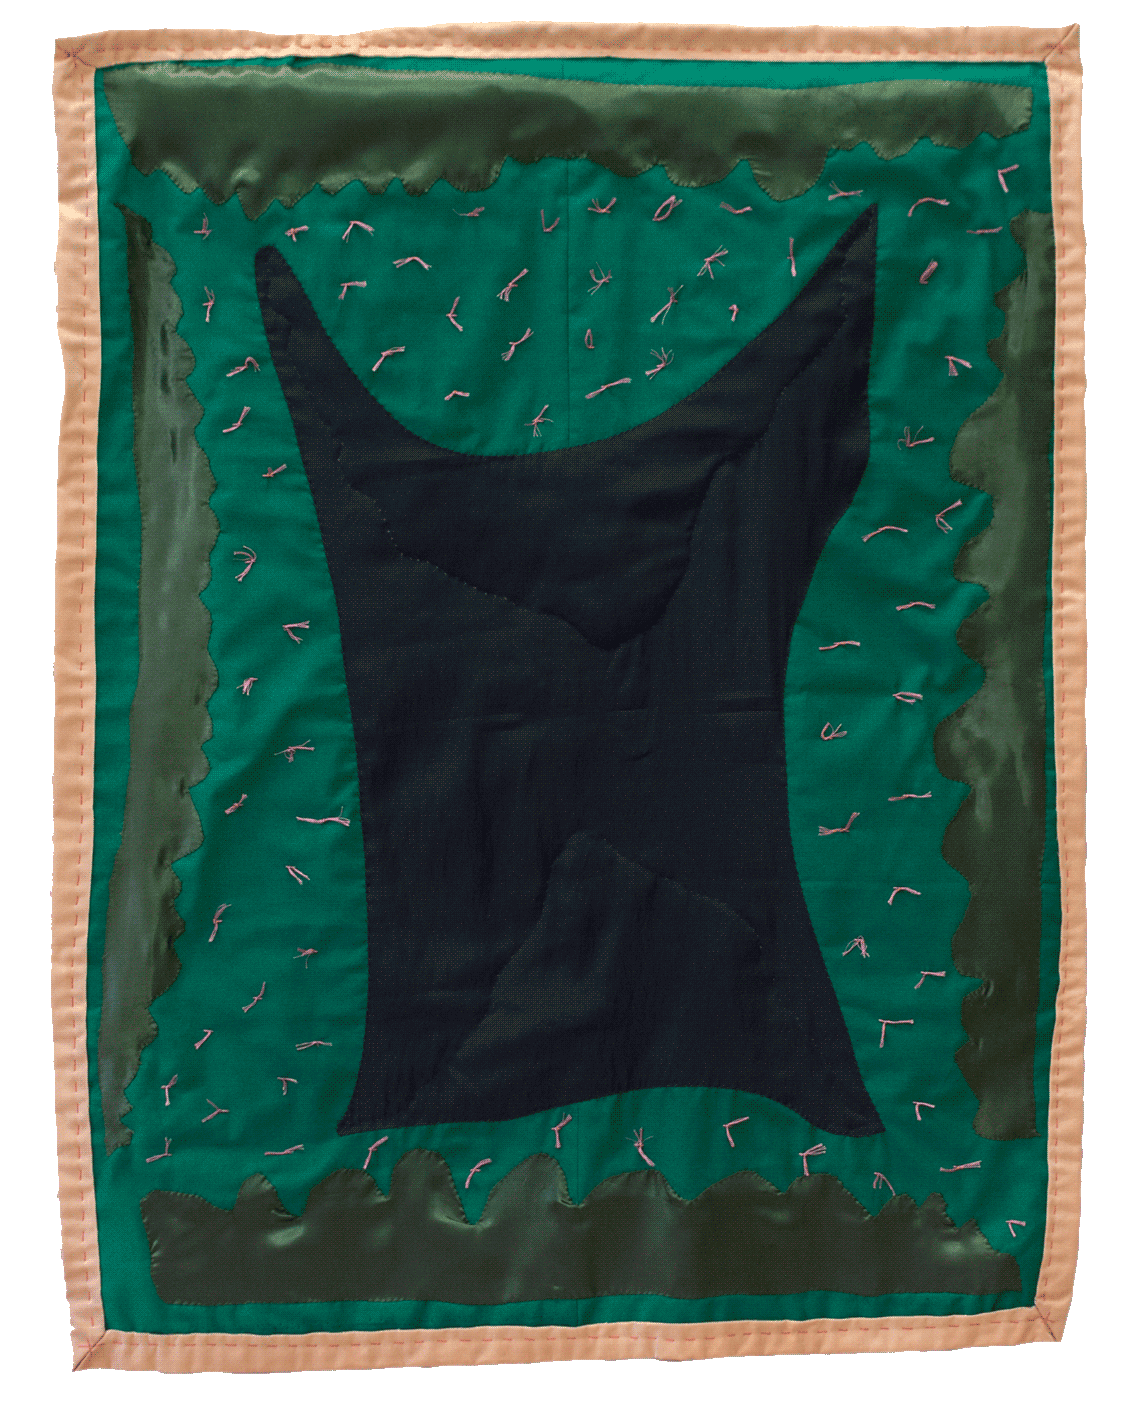 A large green quilt has a dark purple organic shape at the center, around it, 
                are four green fluid shapes. The quilt has a peach colored binding and hot pink knots
                scattered throughout the surface.